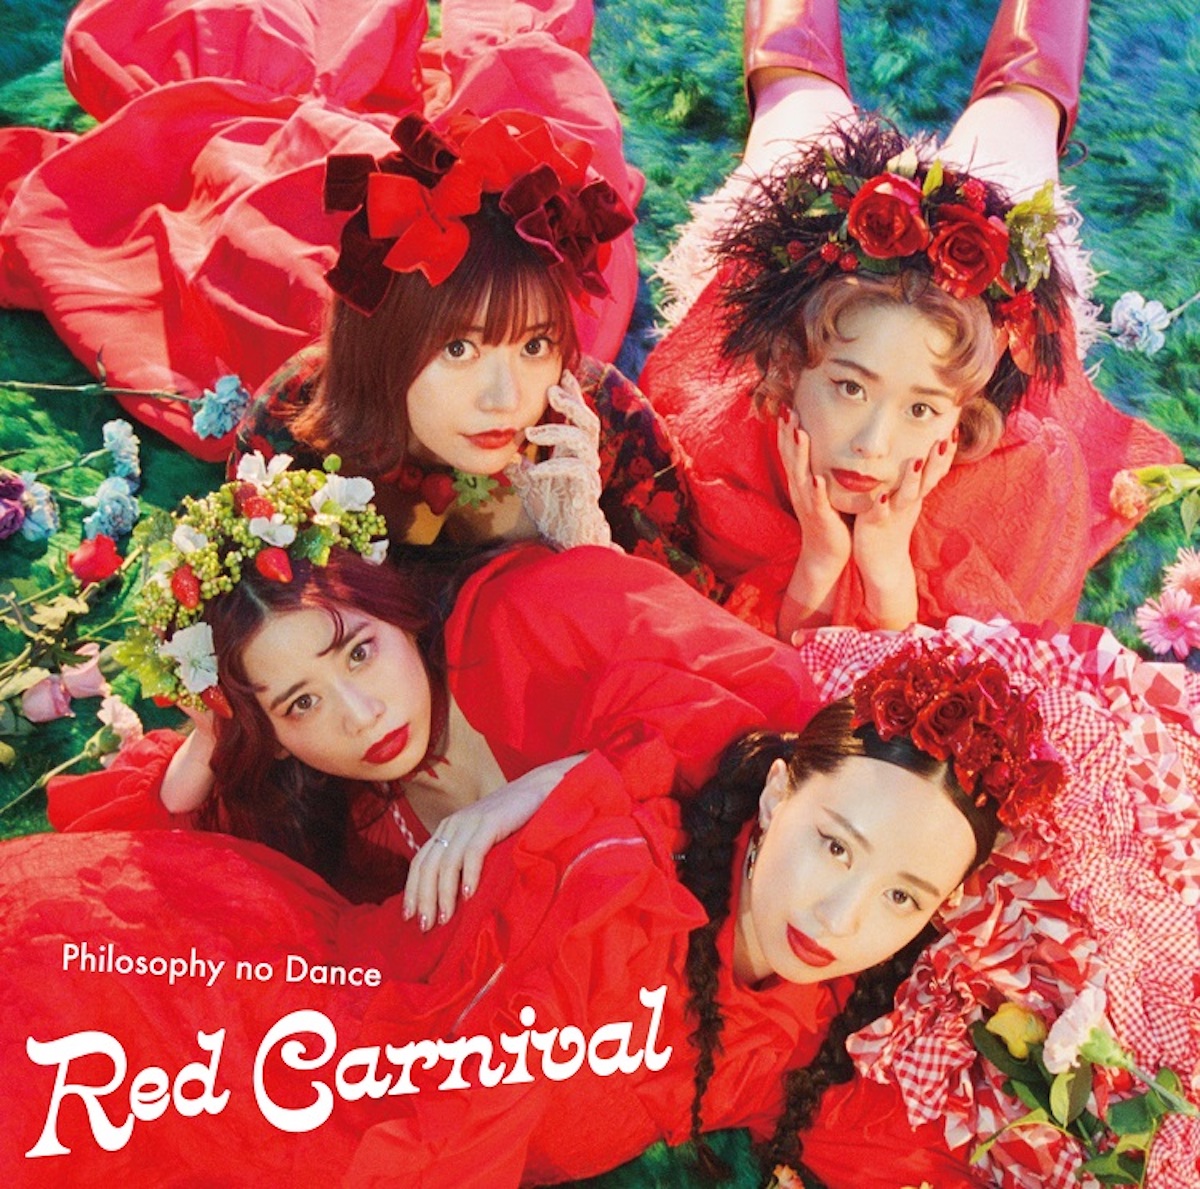 Cover art for『Philosophy no Dance - Clap your hands』from the release『Red Carnival』